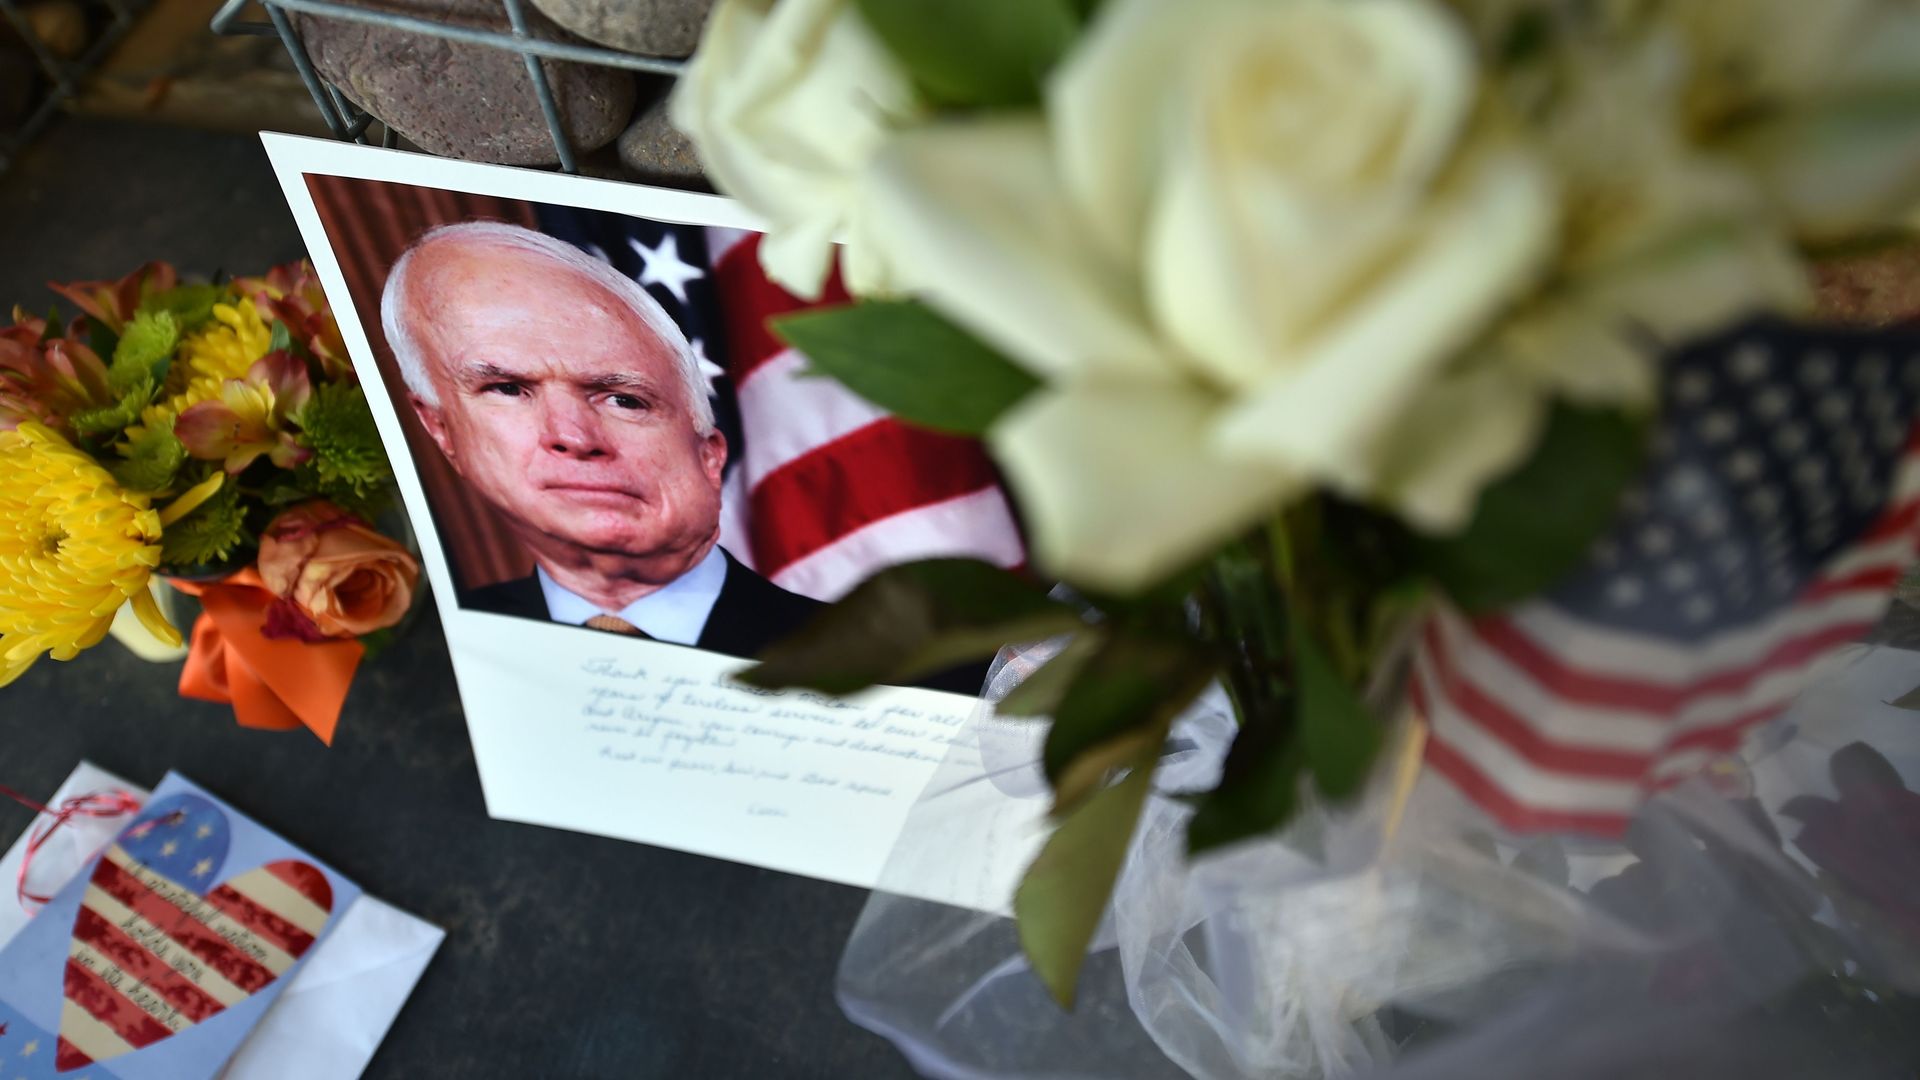 A makeshift memorial for Sen. John McCain outside his office in Phoenix, Arizona. Photo: Robyn Beck/AFP/Getty Images